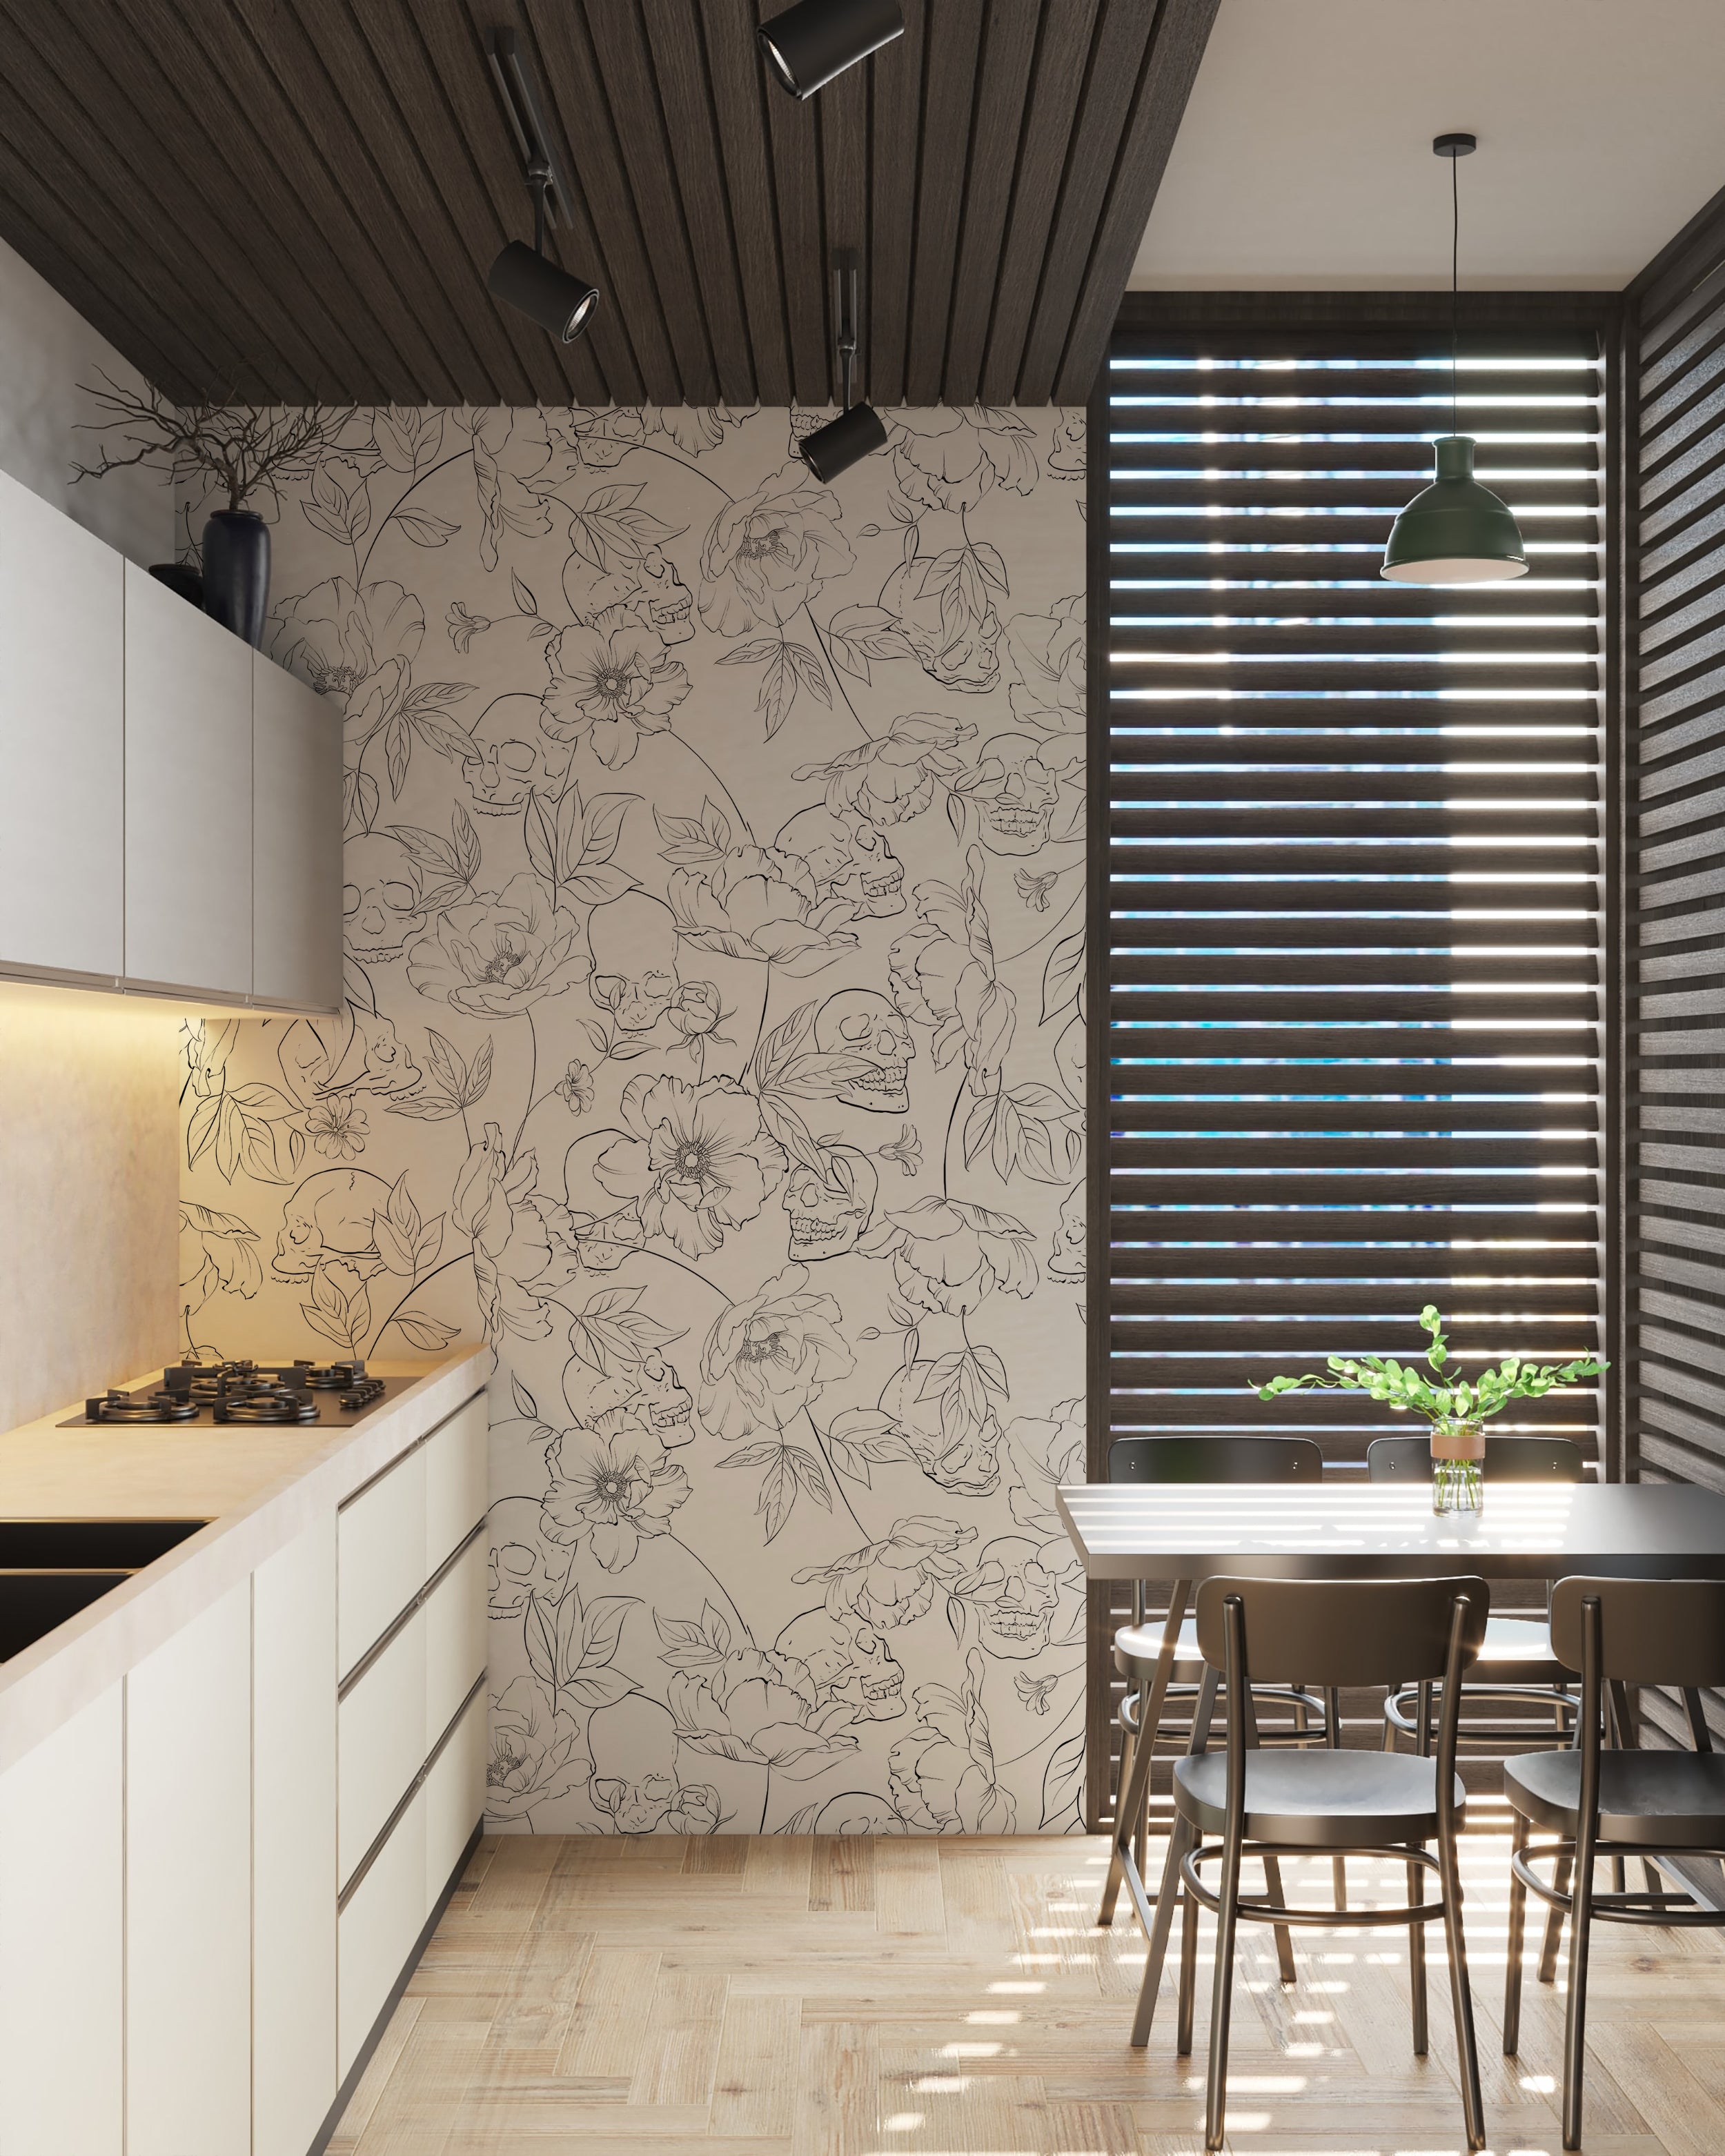 Contemporary kitchen with Dainty Skull Floral Wallpaper featuring a unique pattern of flowers intertwined with skulls in a monochromatic sketch style on a light background, creating a striking contrast with the modern white cabinetry and wooden details.